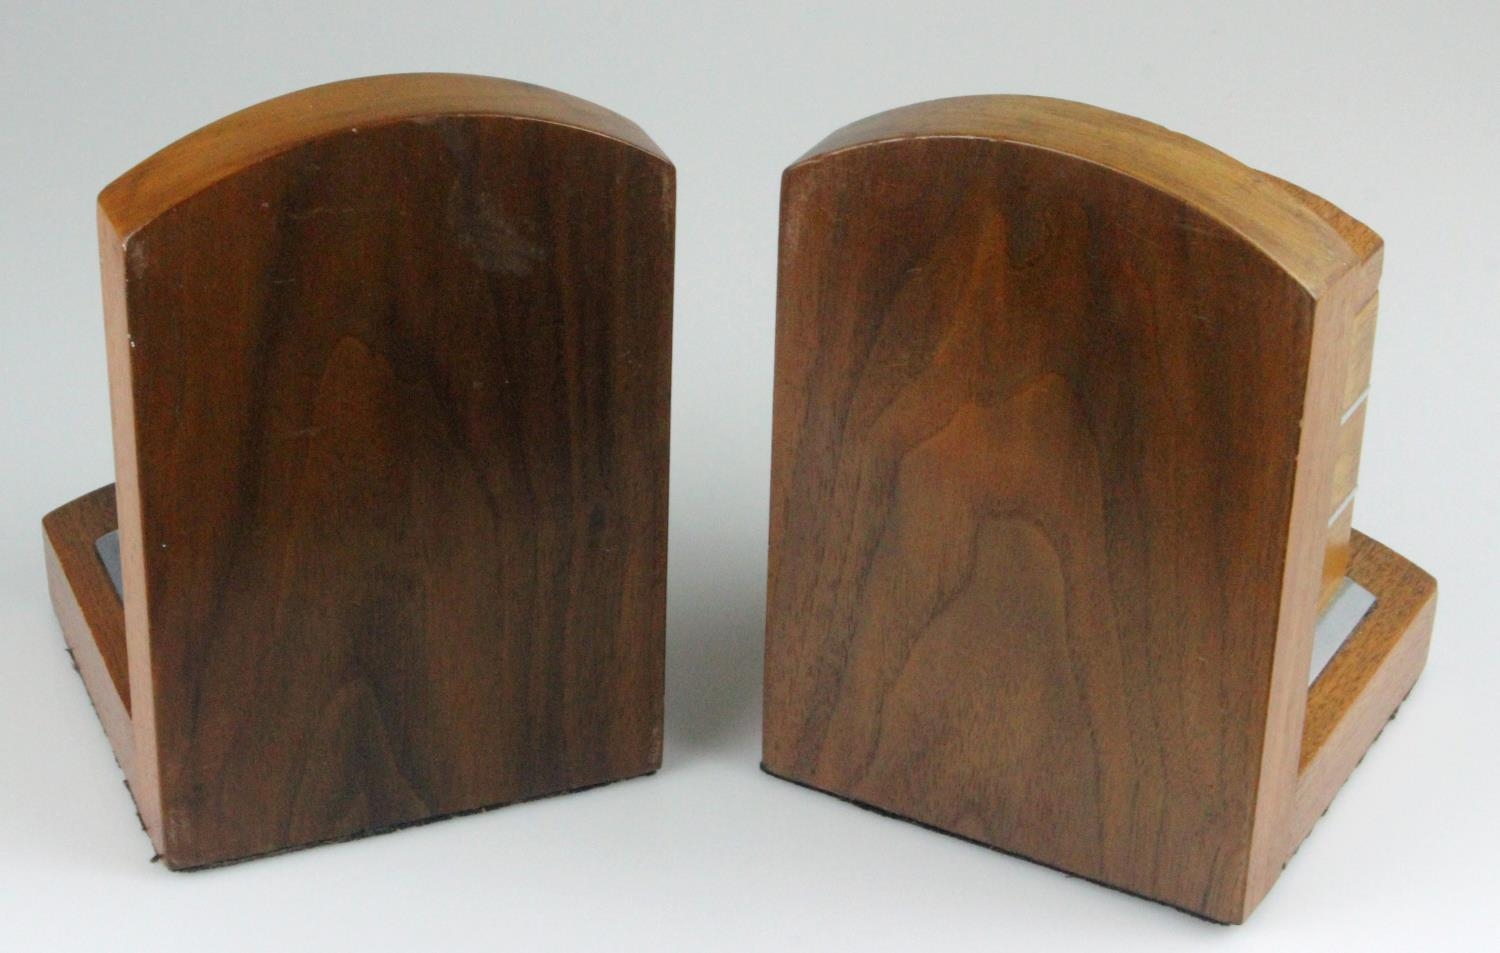 Art Deco Walnut Bookends with Aluminium Trim. Each with a compartment, fitted lid and bakerlite - Image 4 of 4